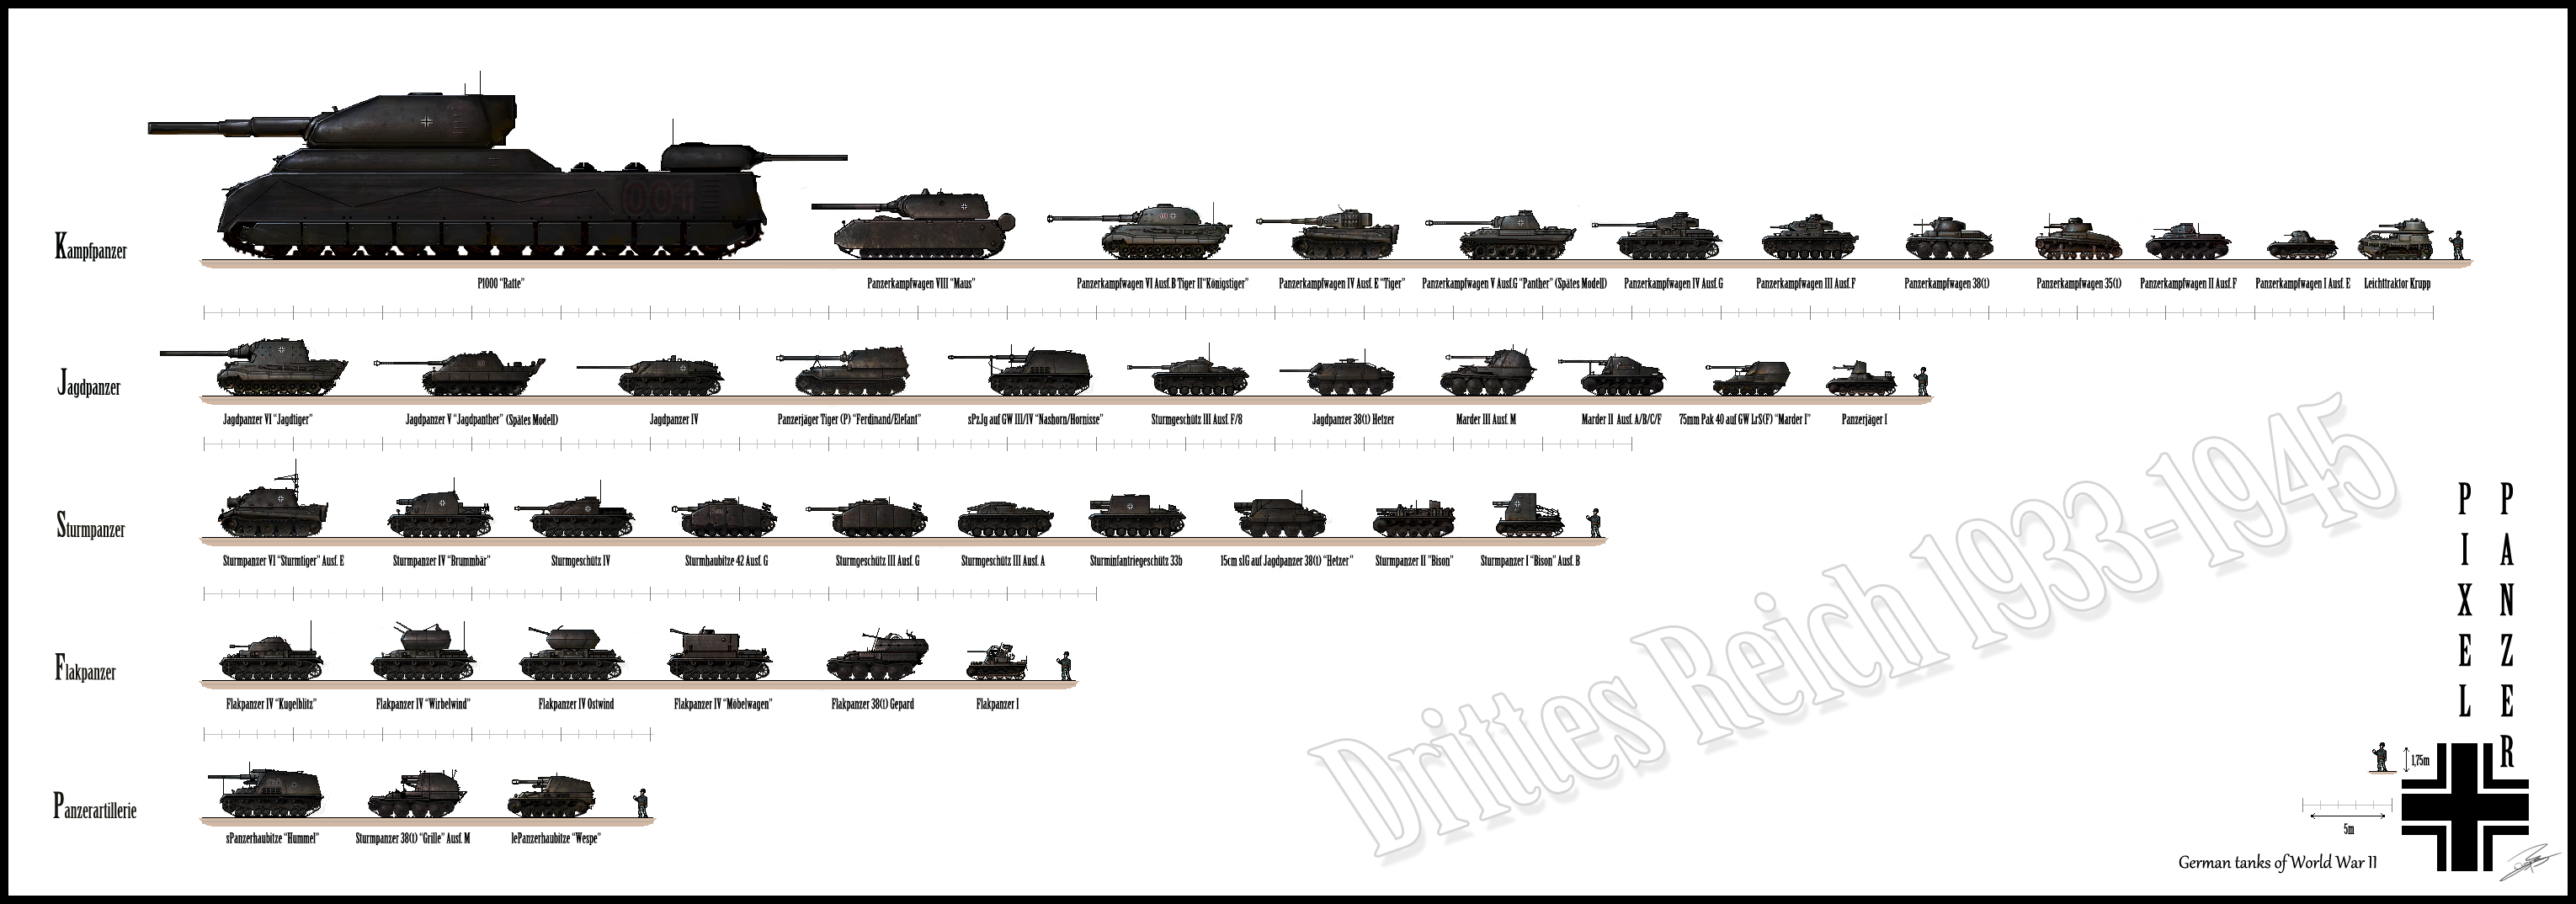 pixel_panzer_by_tiefsee-d48xf43.png